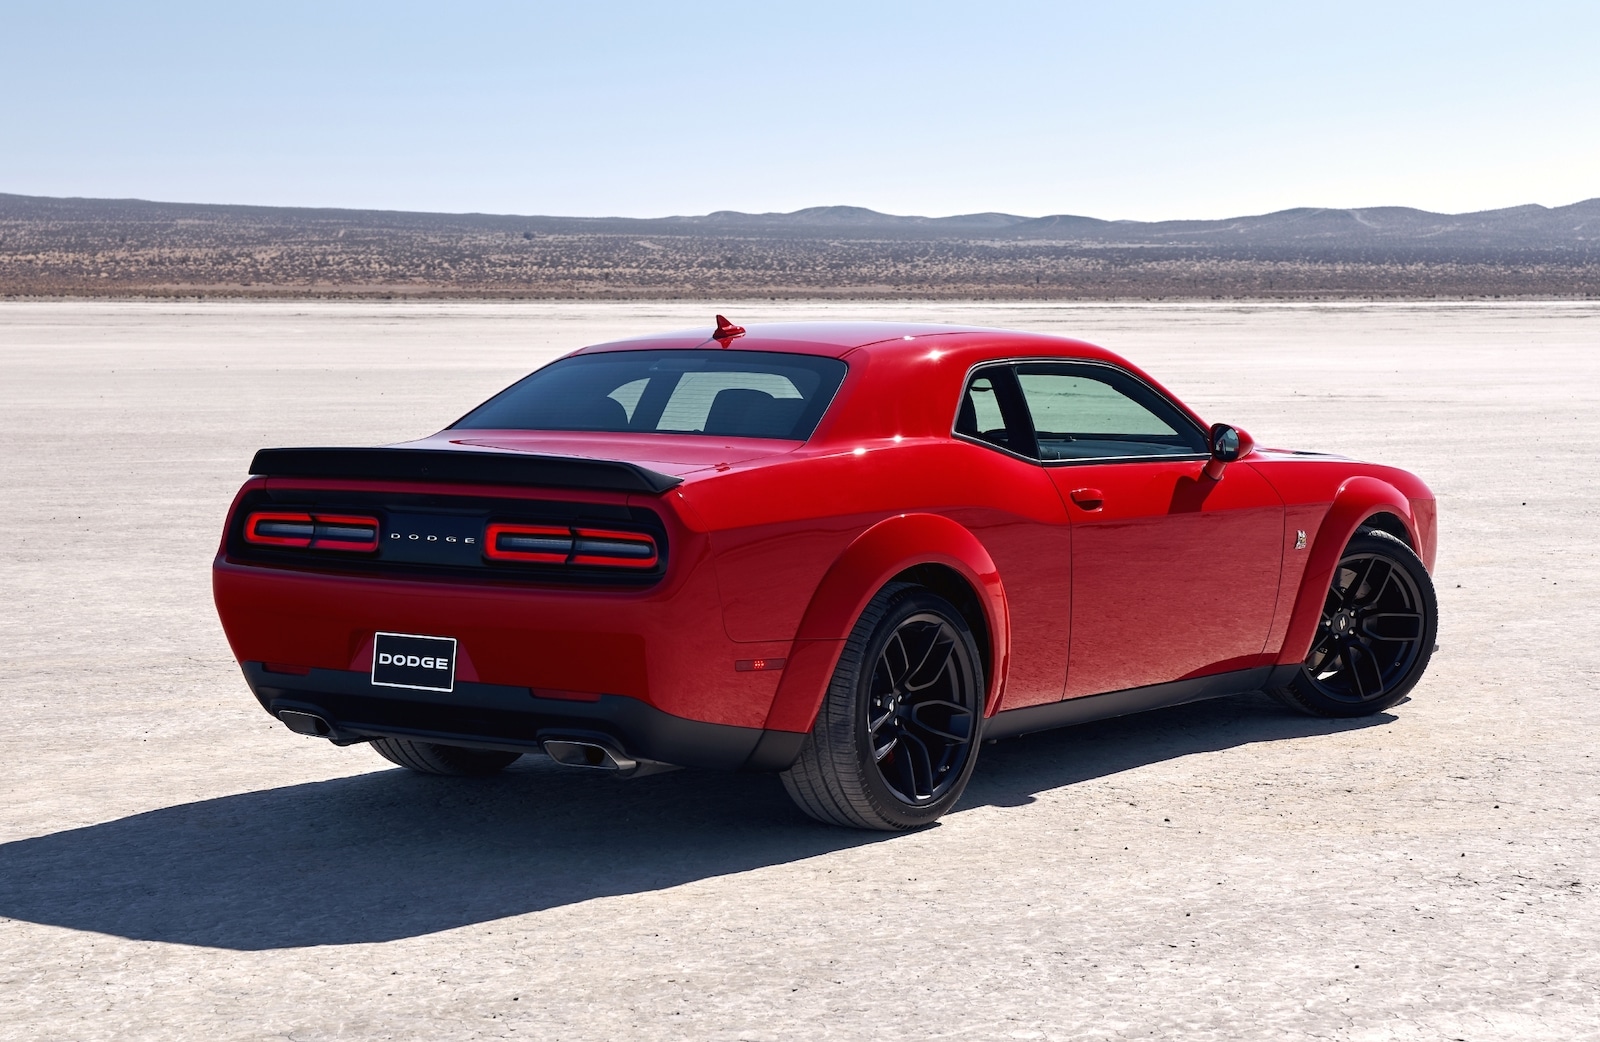 A Week With 2020 Dodge Challenger Rt 392 Scat Pack Widebody The